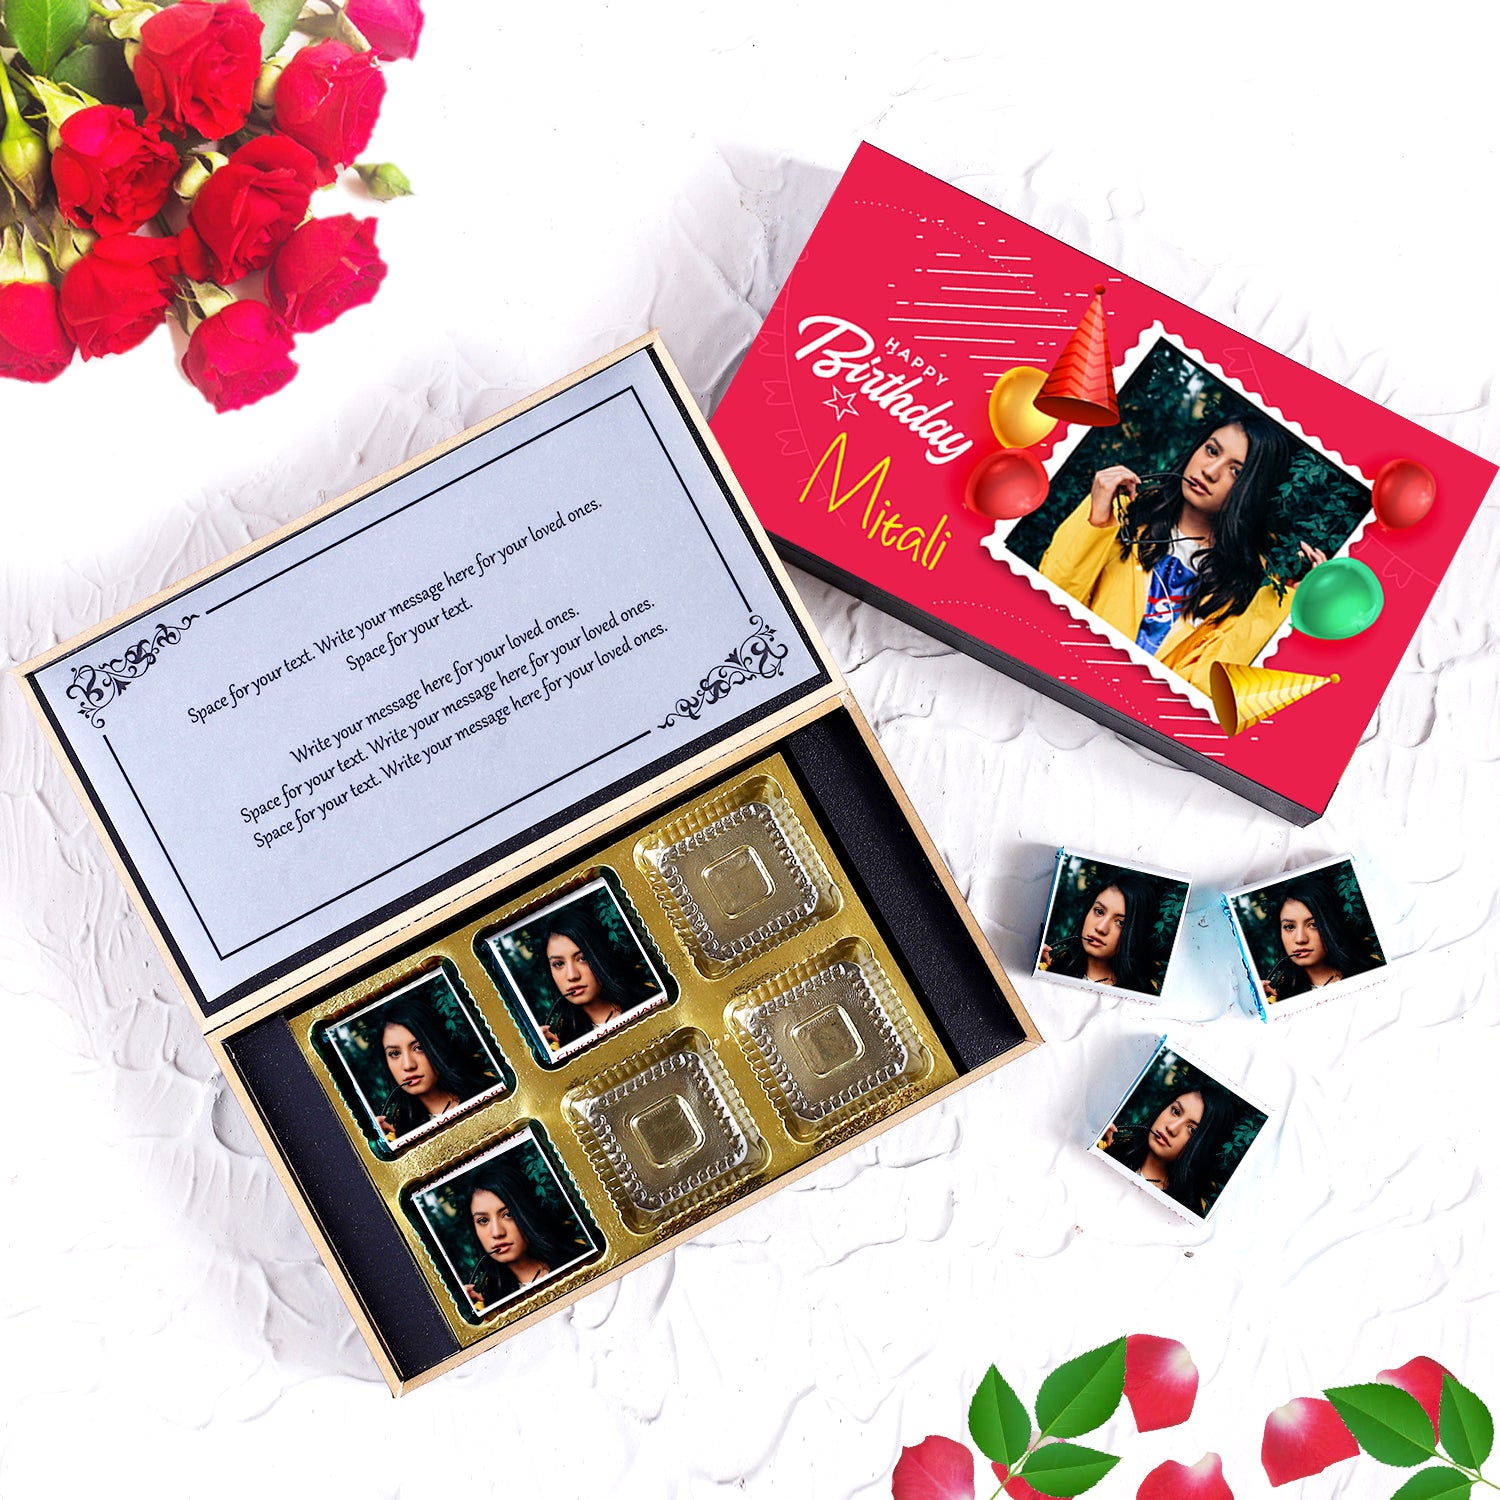 Online Customised chocolates as a special birthday gift,Personalised Chocolate Gift Box, Chocolates With Names Photo, Customised Gifts India, Dark Customized Near Me ,For Birthdays Message Inside, In Special Birthday ,Happy 1 Rupees Images, On Wrapper Singapore Name, Personalized Online Ideas, Girl Unique Same Day Delivery ,Online Pack Best Customize, Her Boyfriend Husband, Girlfriend chocolate gift